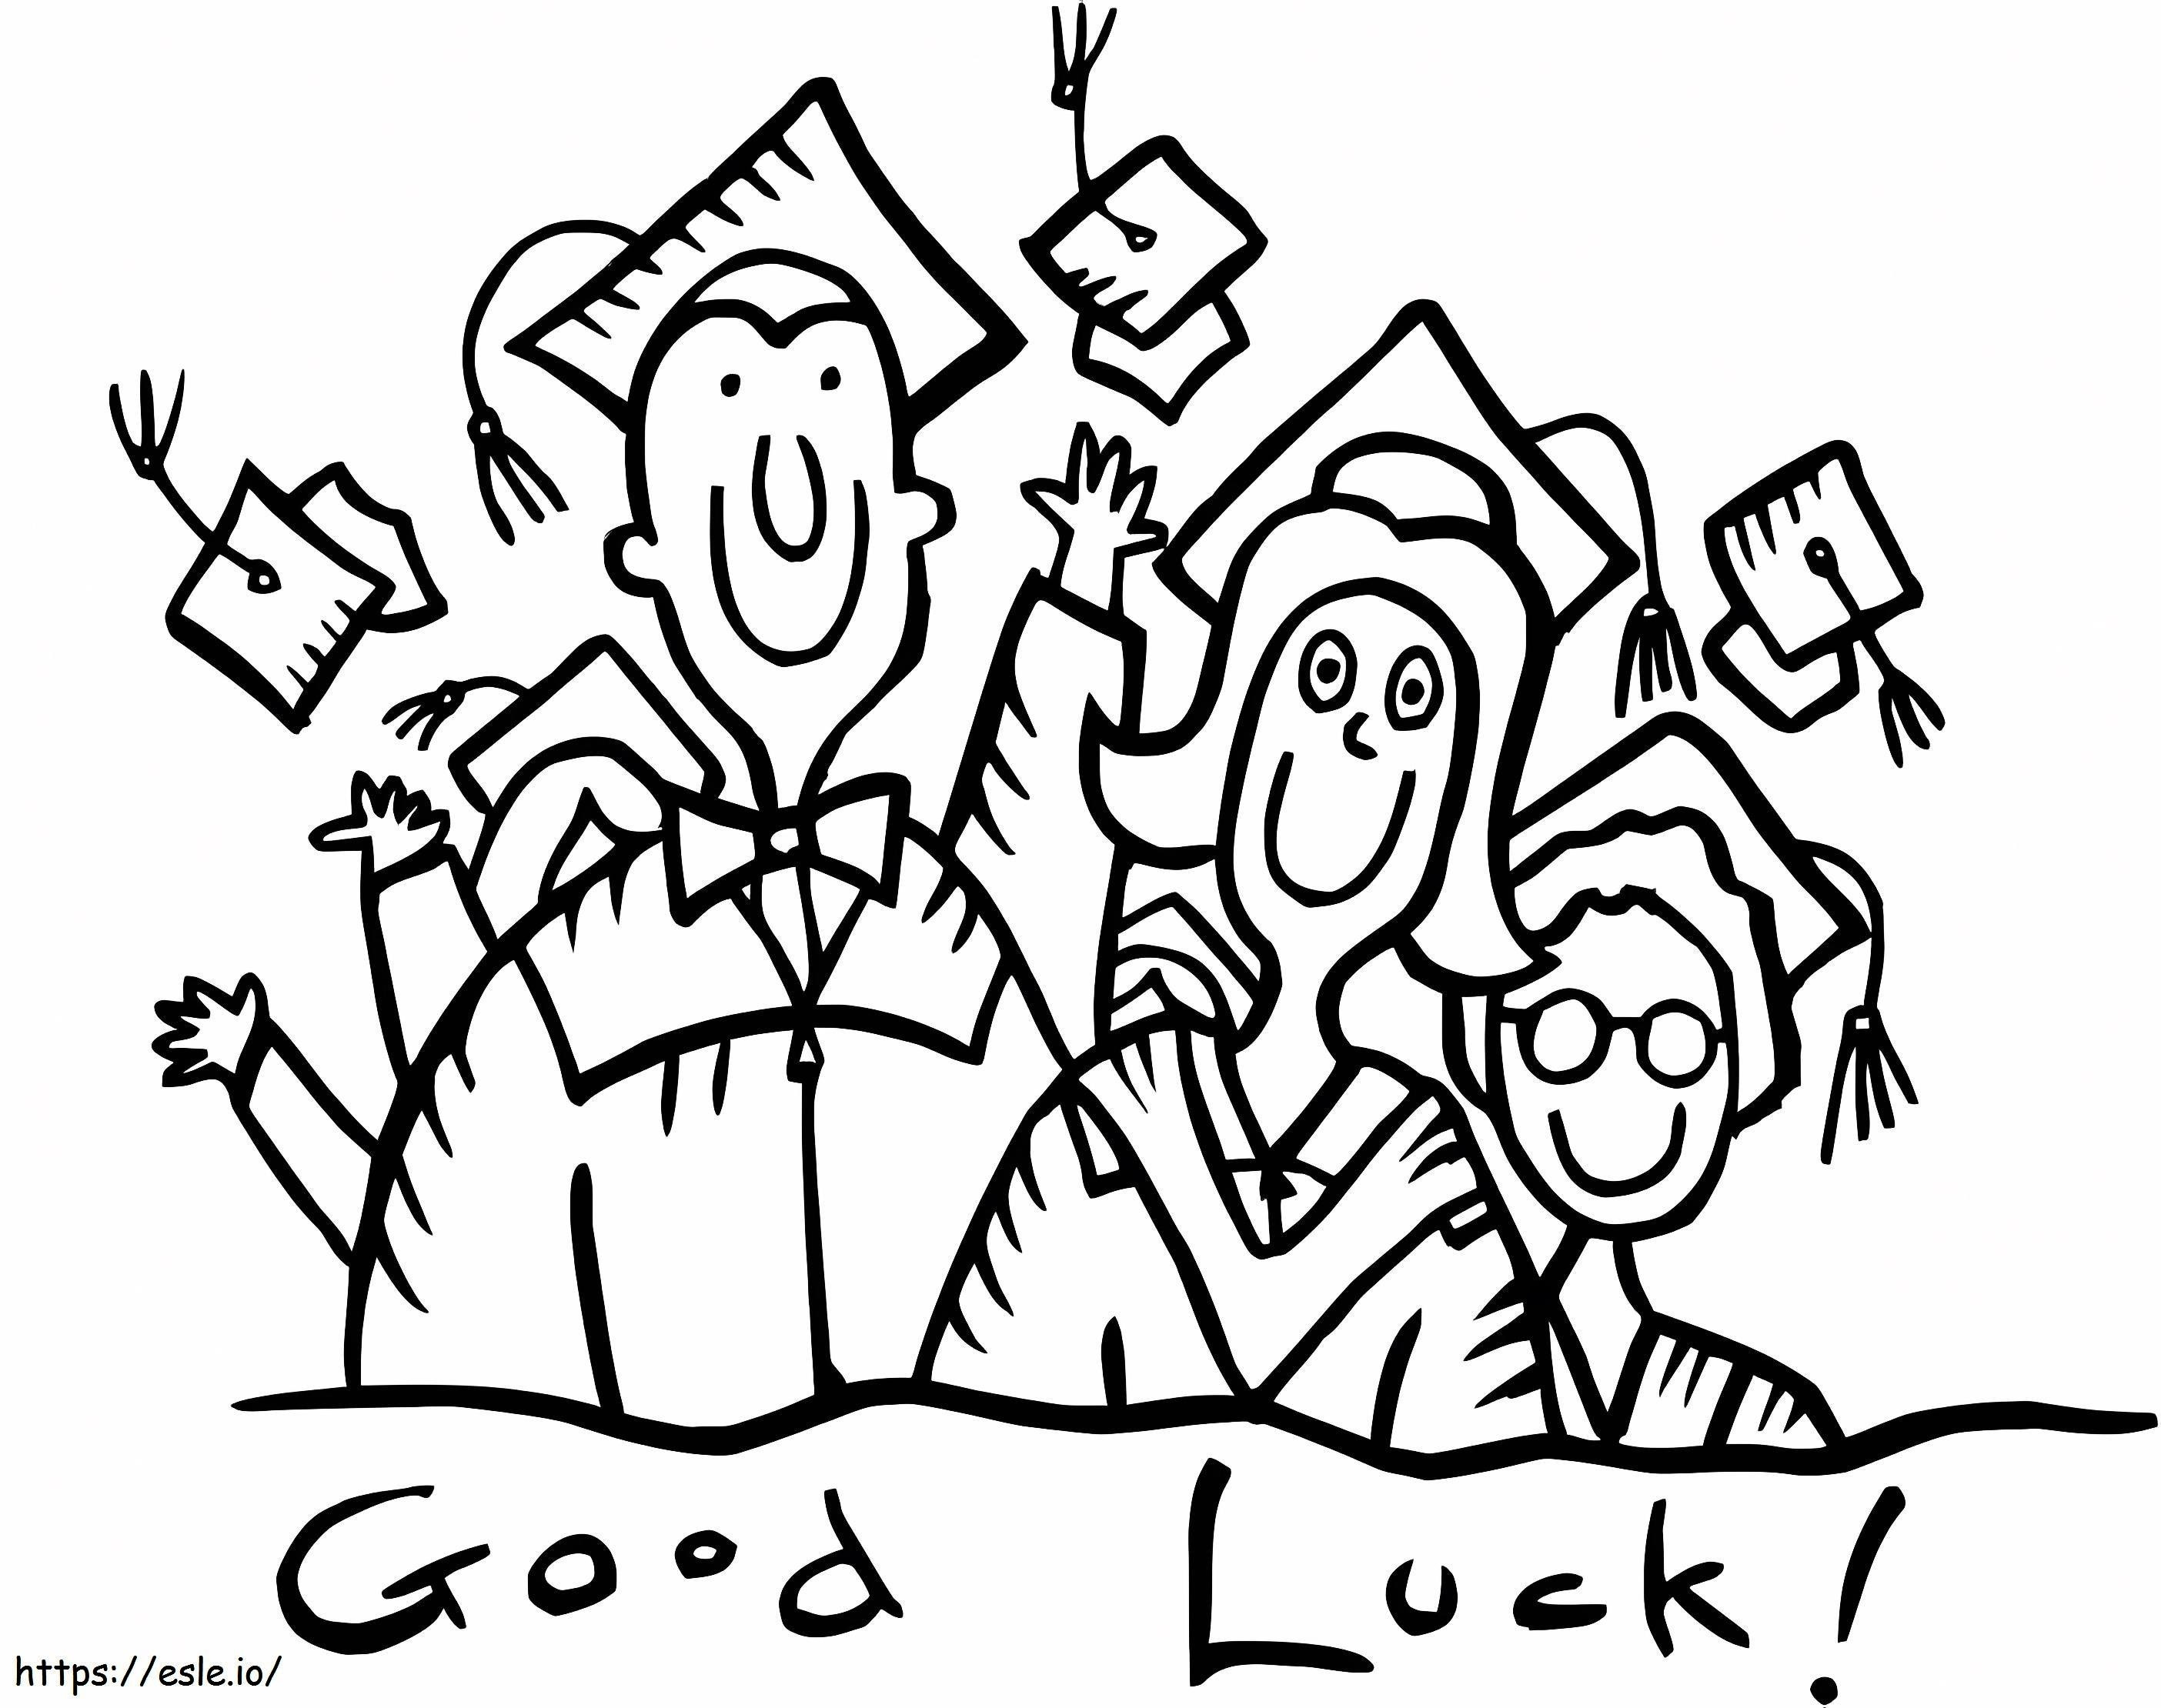 Graduation Good Luck coloring page